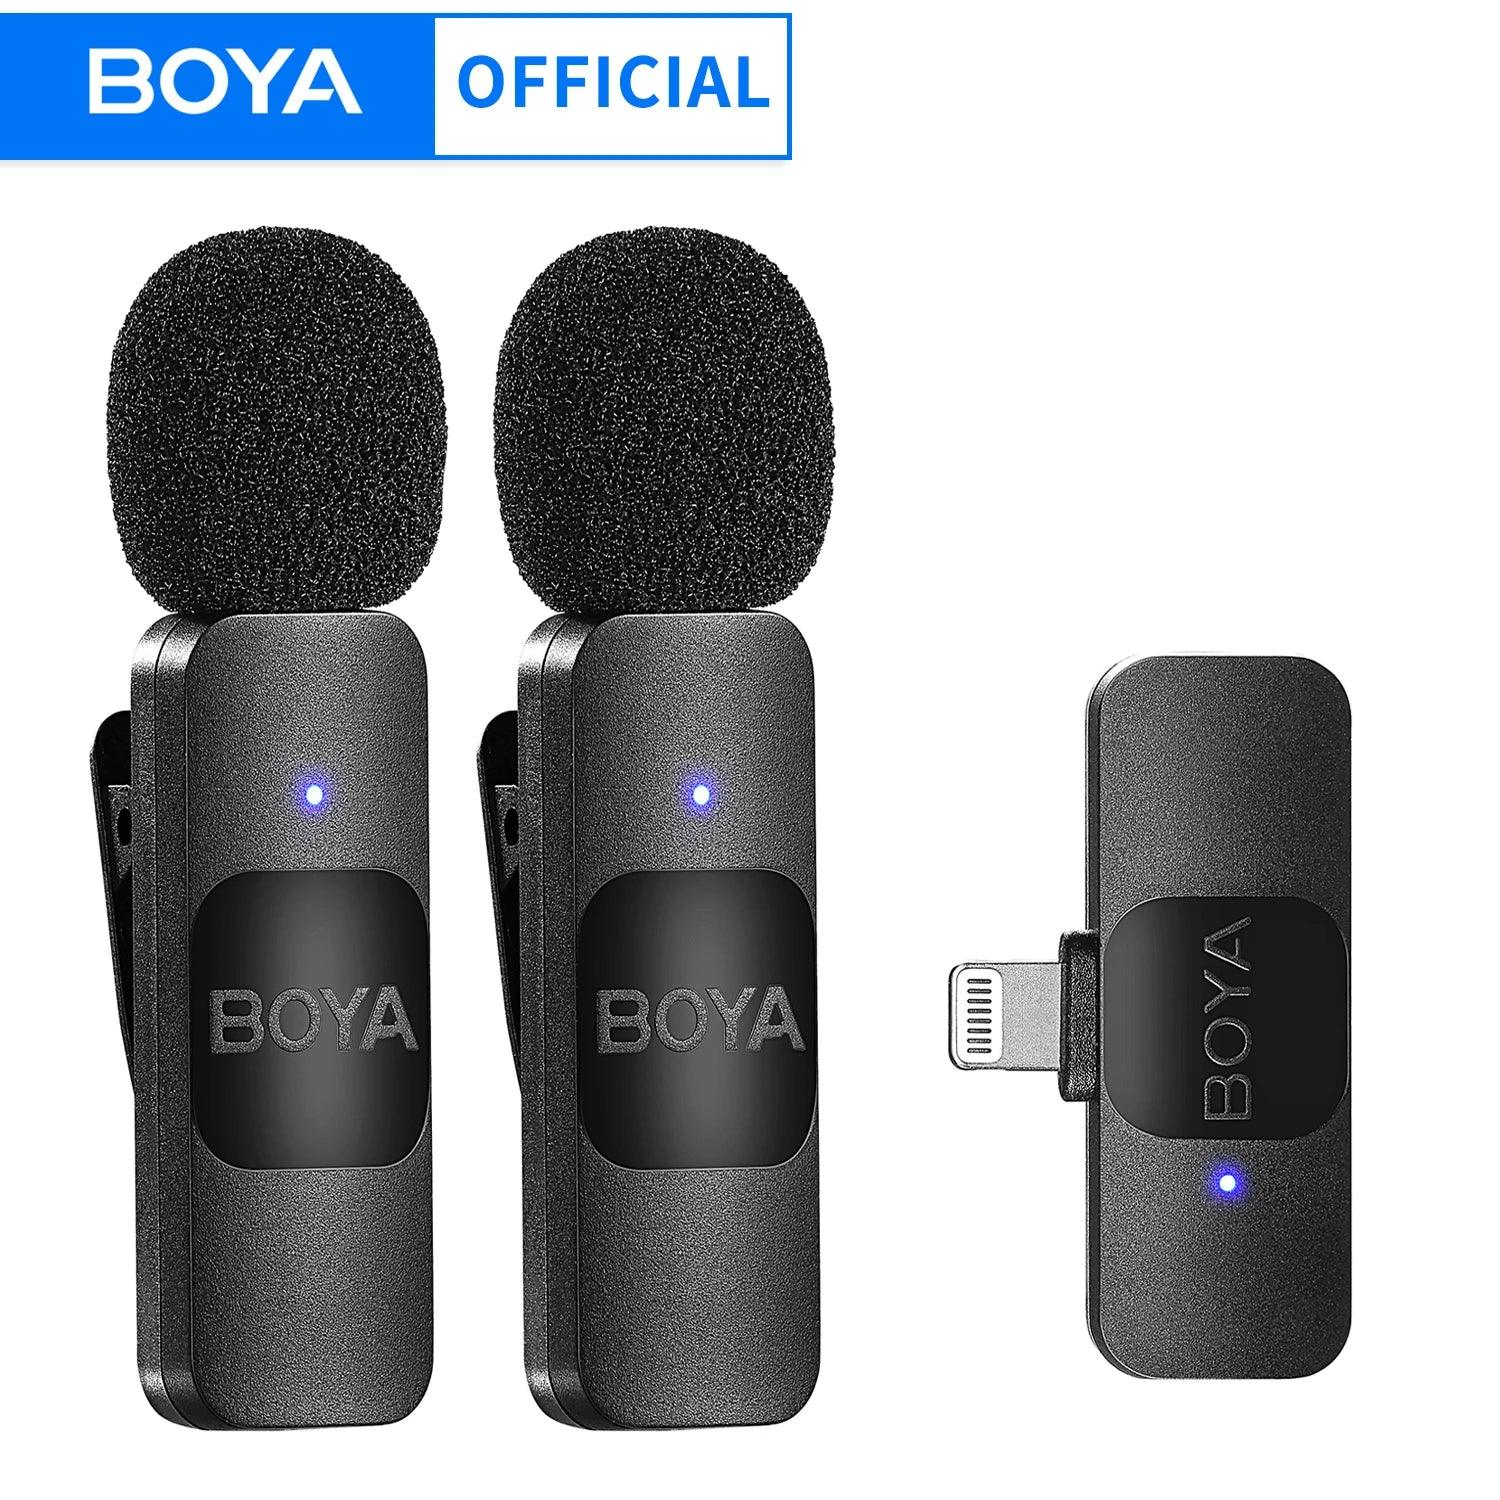 Professional Wireless Lavalier Microphone Kit for iOS and Android Devices  ourlum.com   